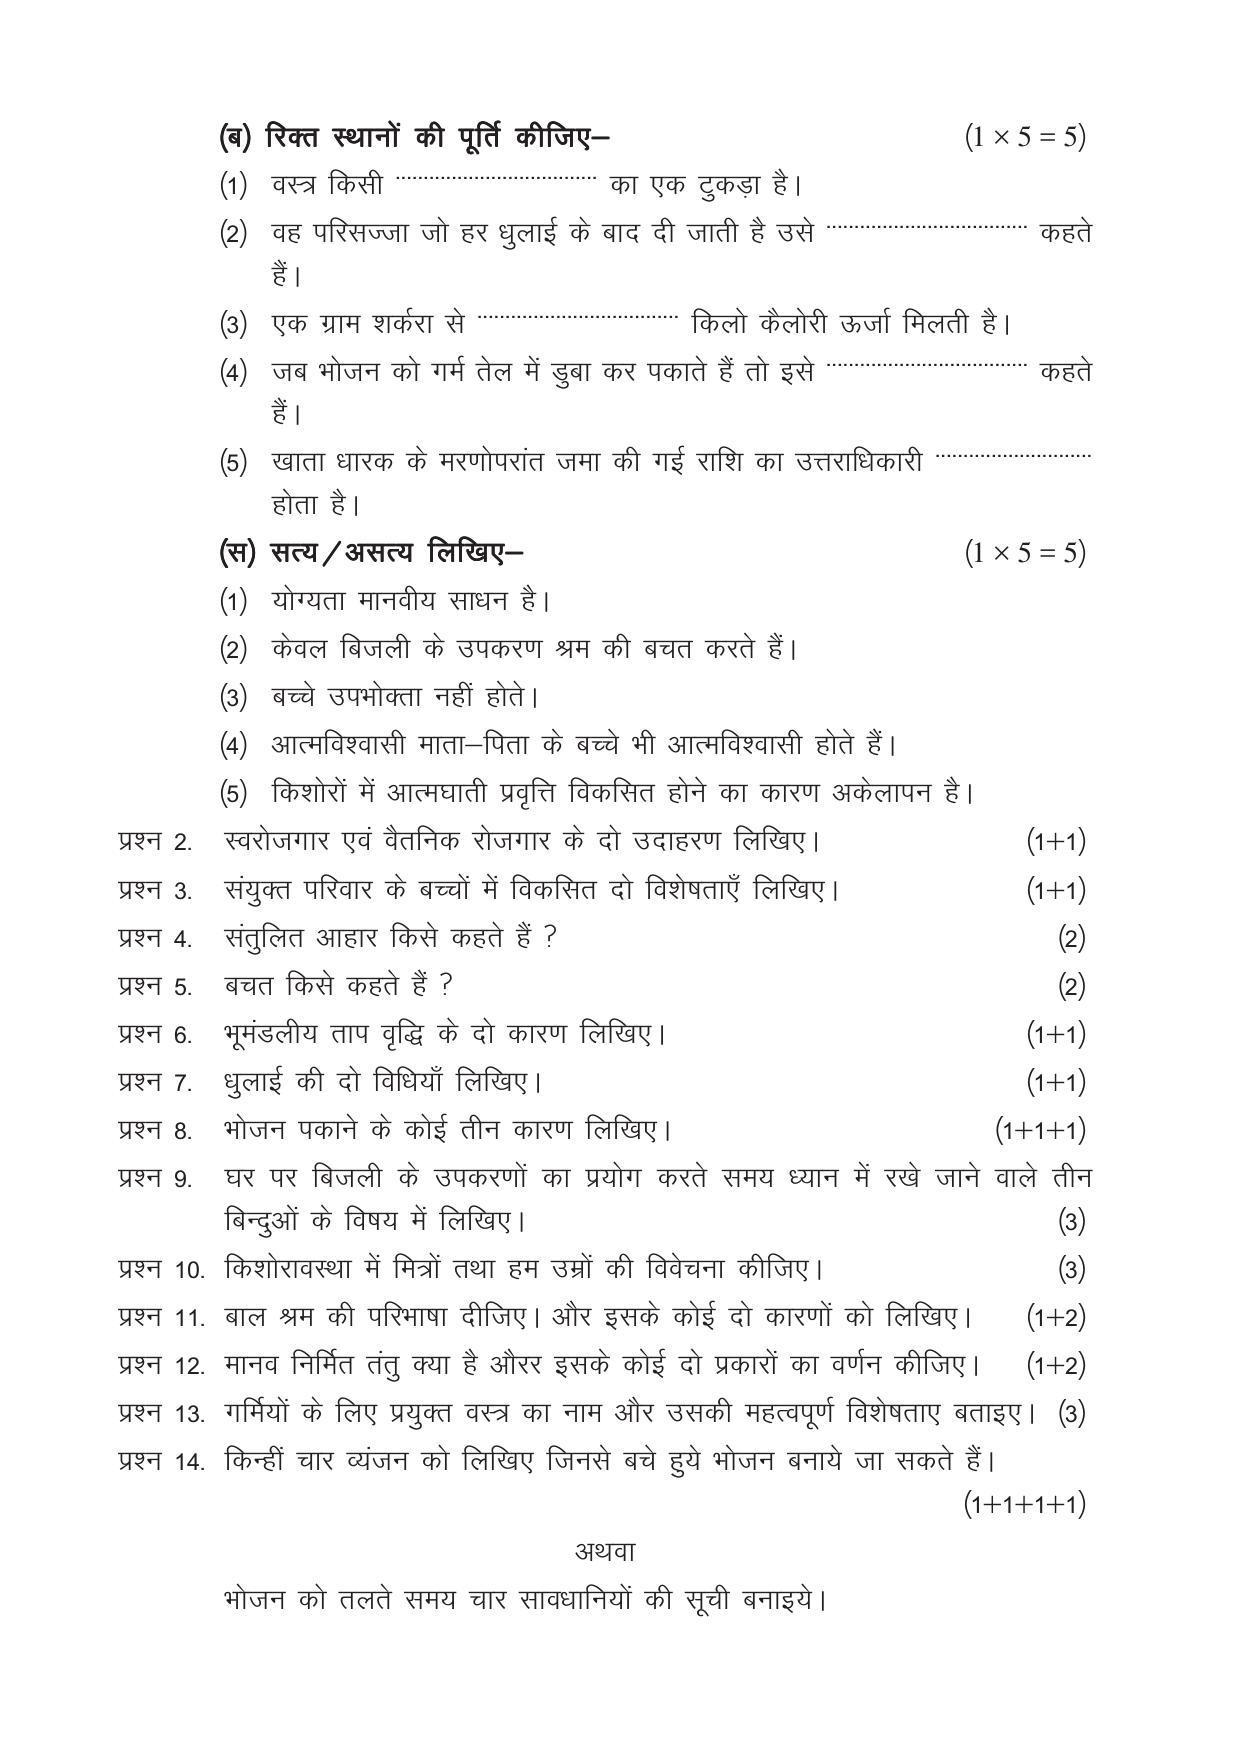 CGSOS Class 12 Model Question Paper - Home Science - II - Page 2